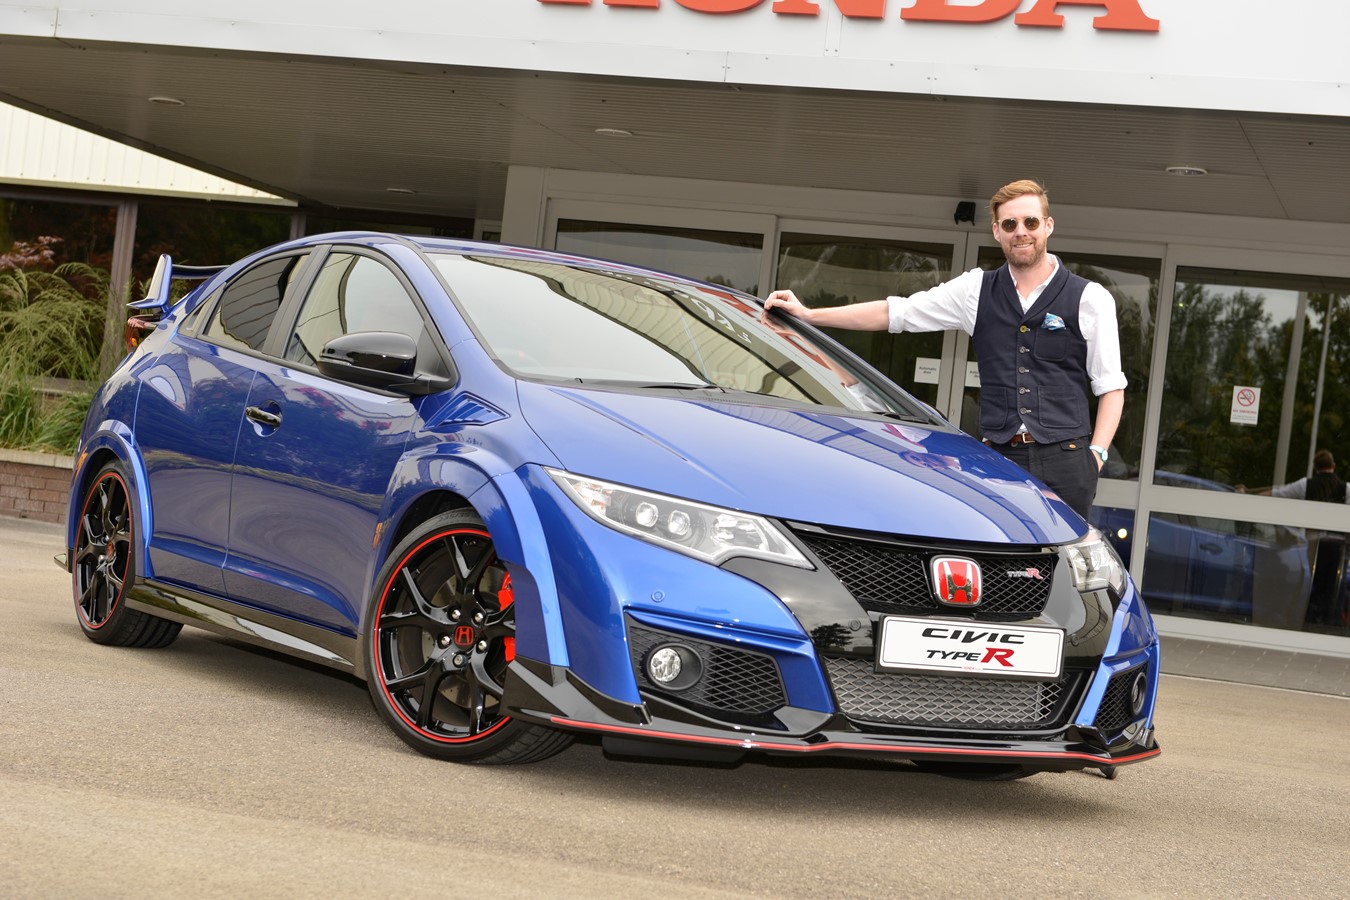 Kaiser Chiefs’ Ricky Wilson gets behind the wheel of his new Civic Type R